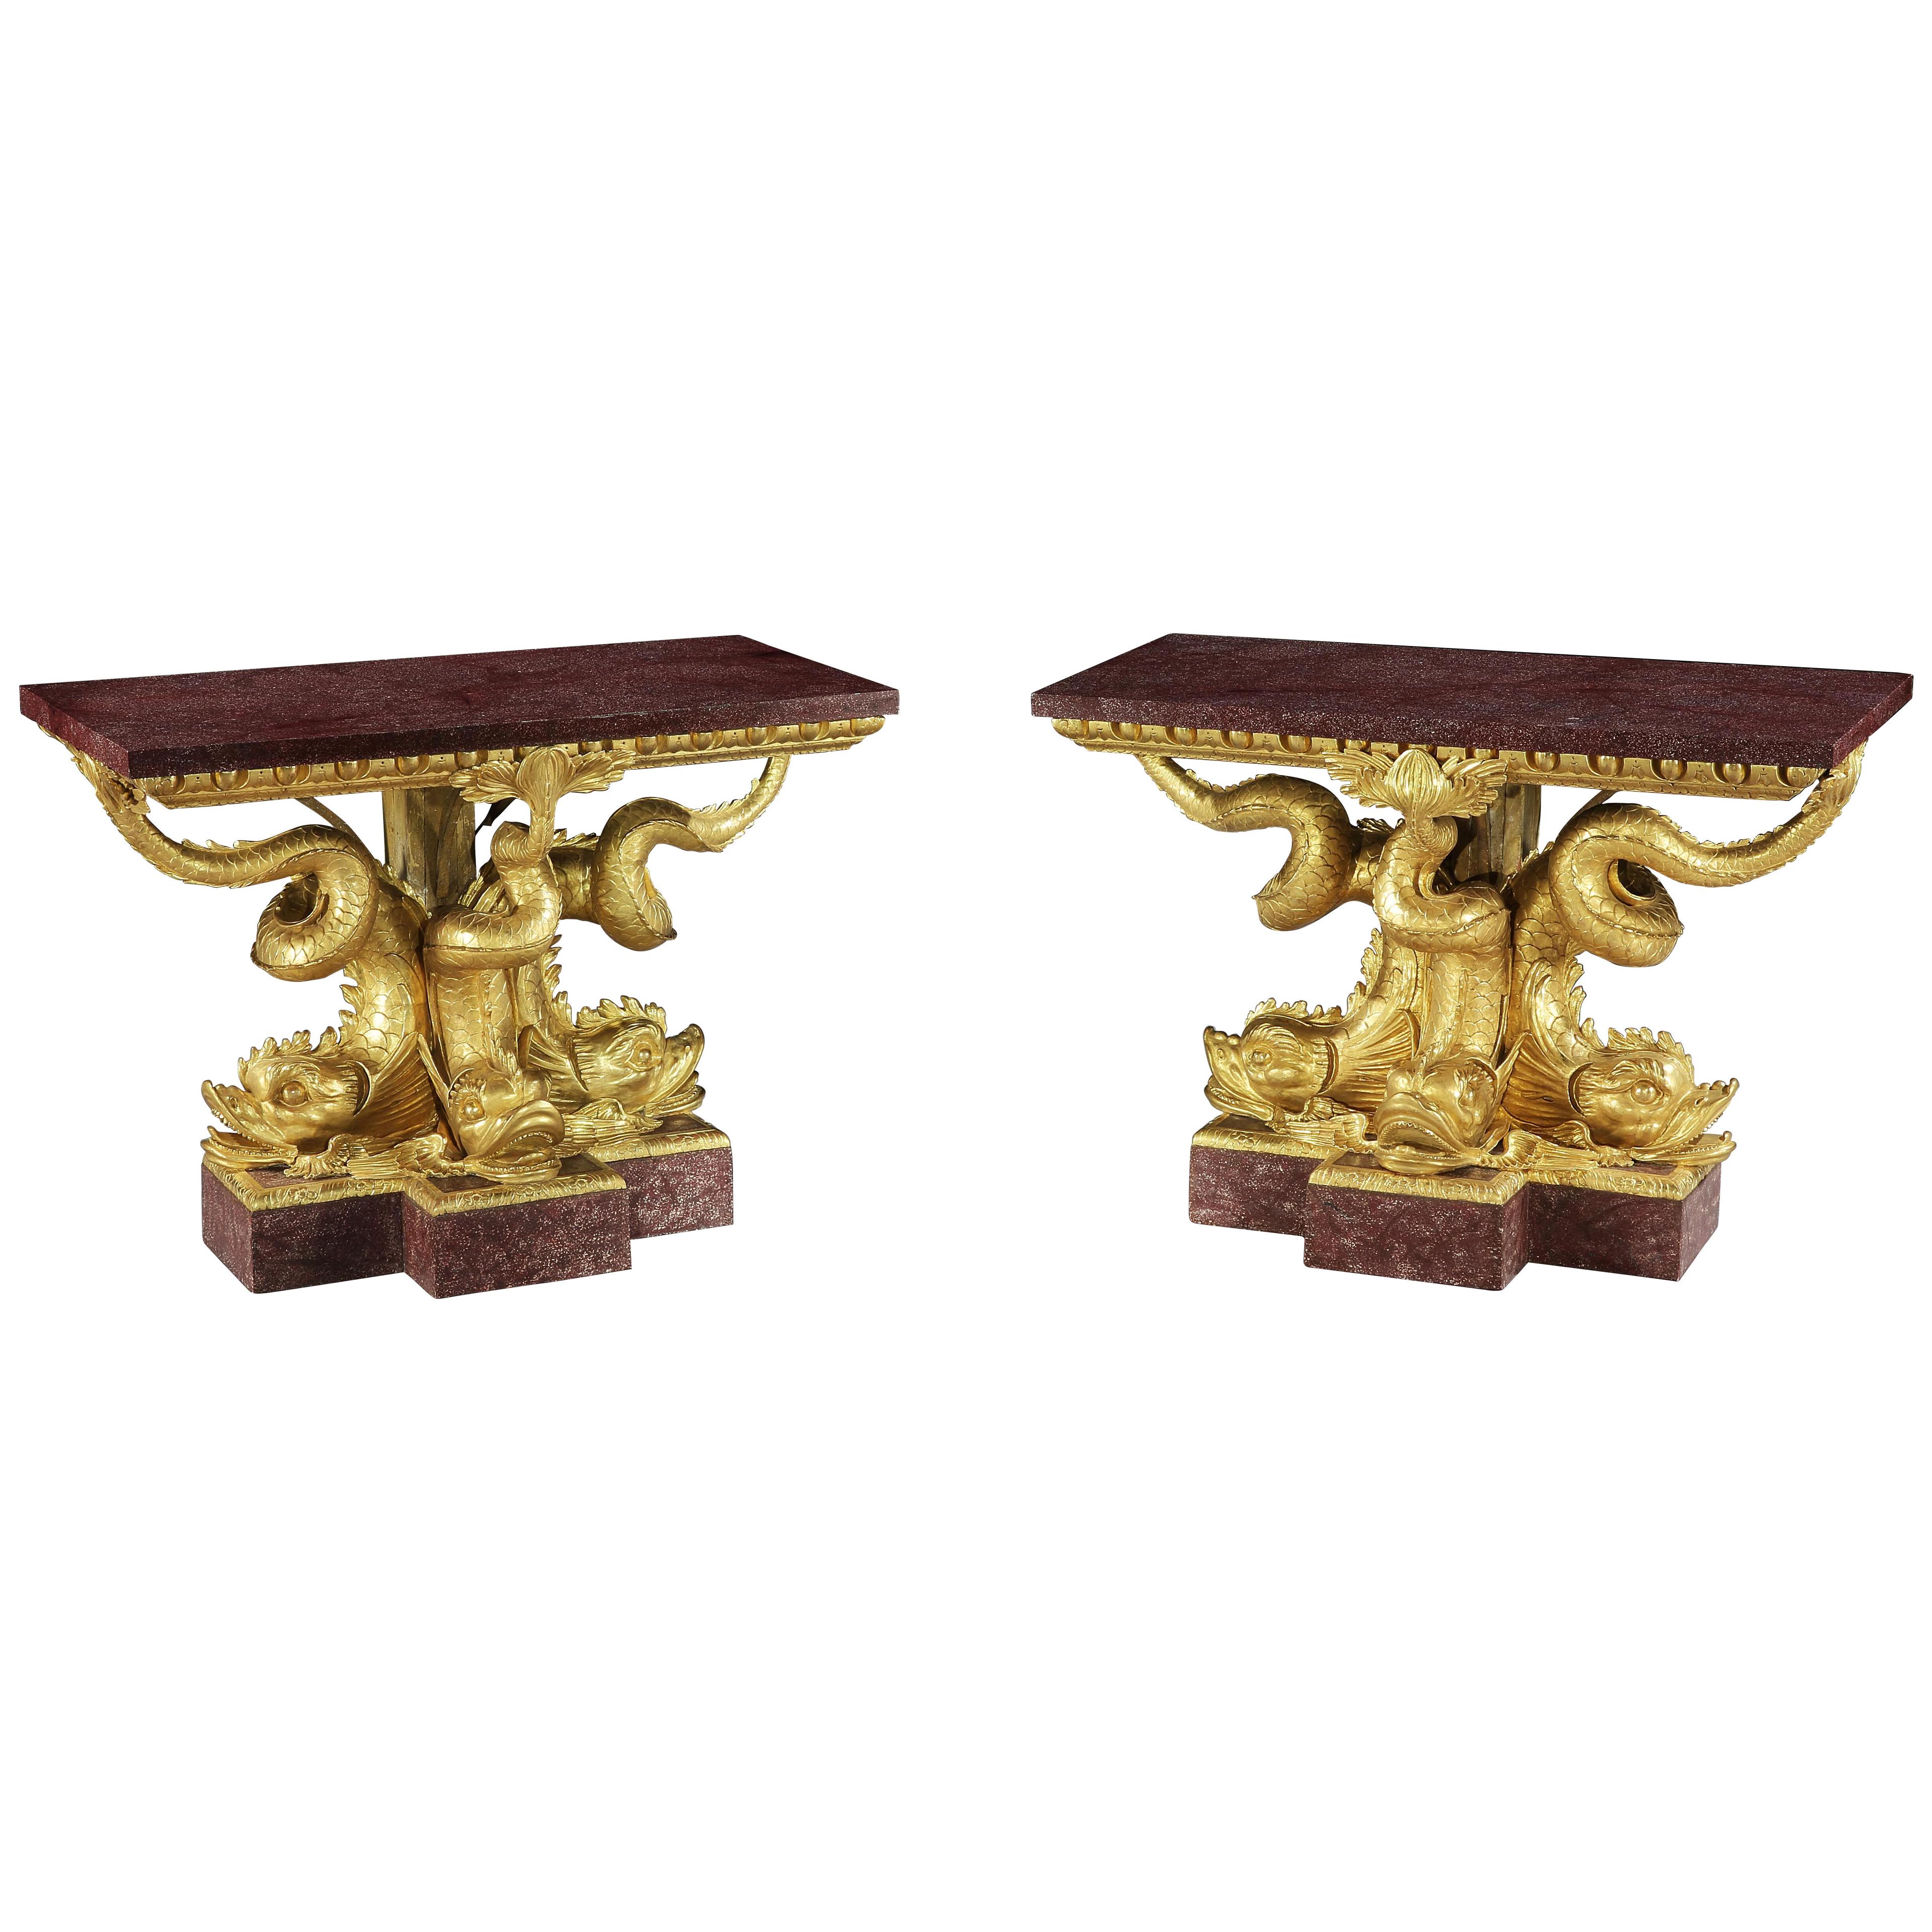 A Magnificent Pair of Regency Giltwood and Porphry Dolphin Tables